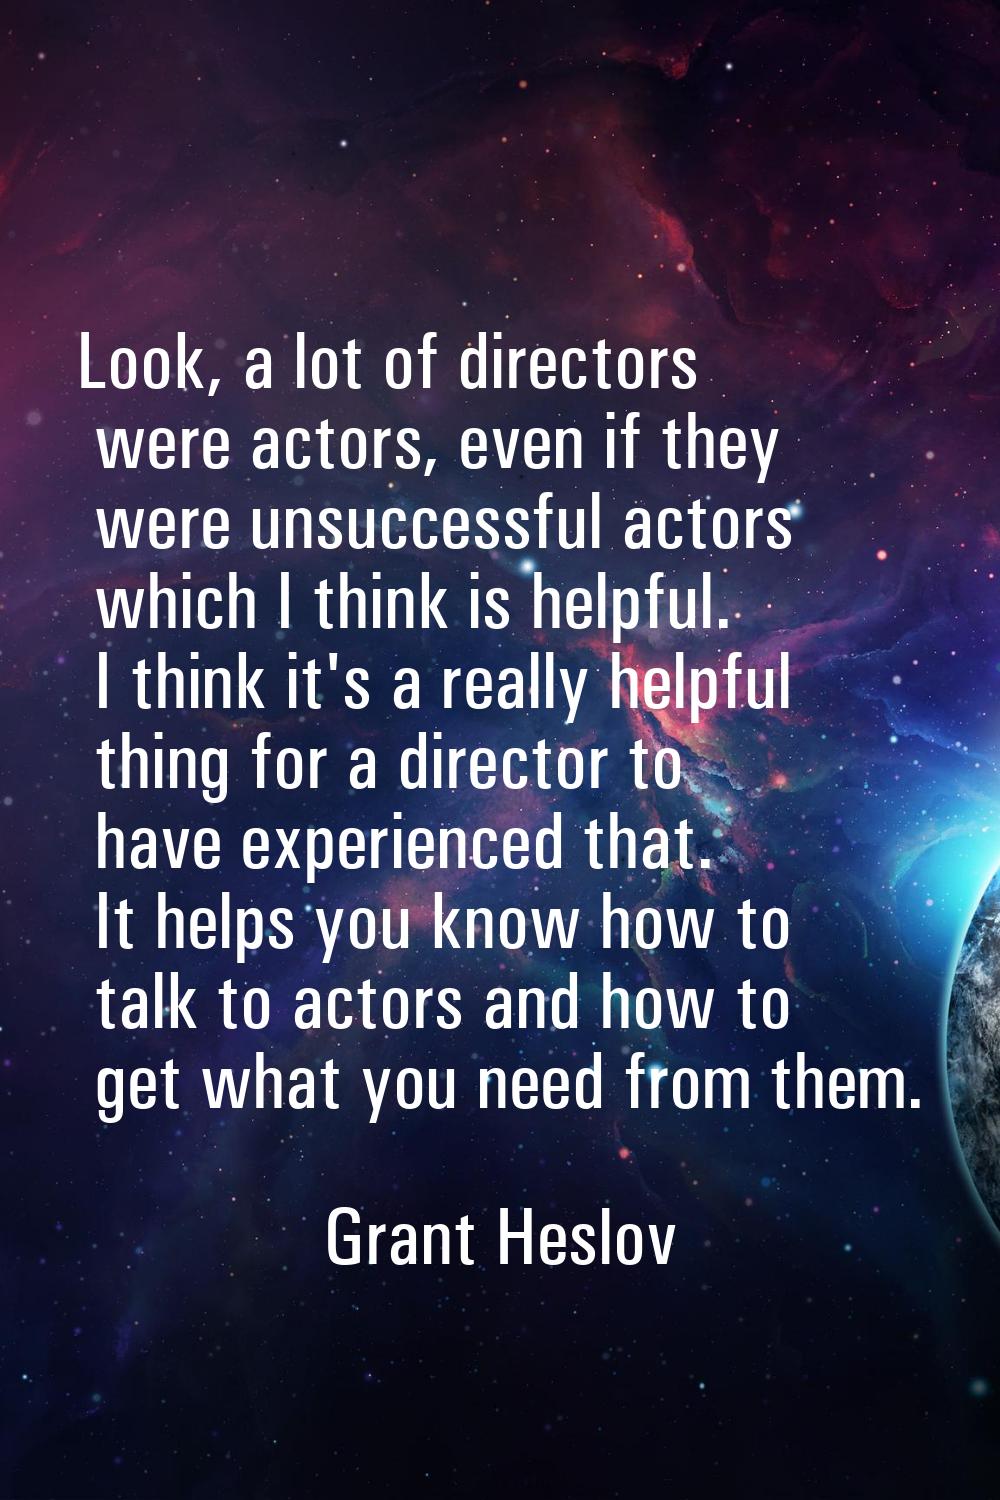 Look, a lot of directors were actors, even if they were unsuccessful actors which I think is helpfu